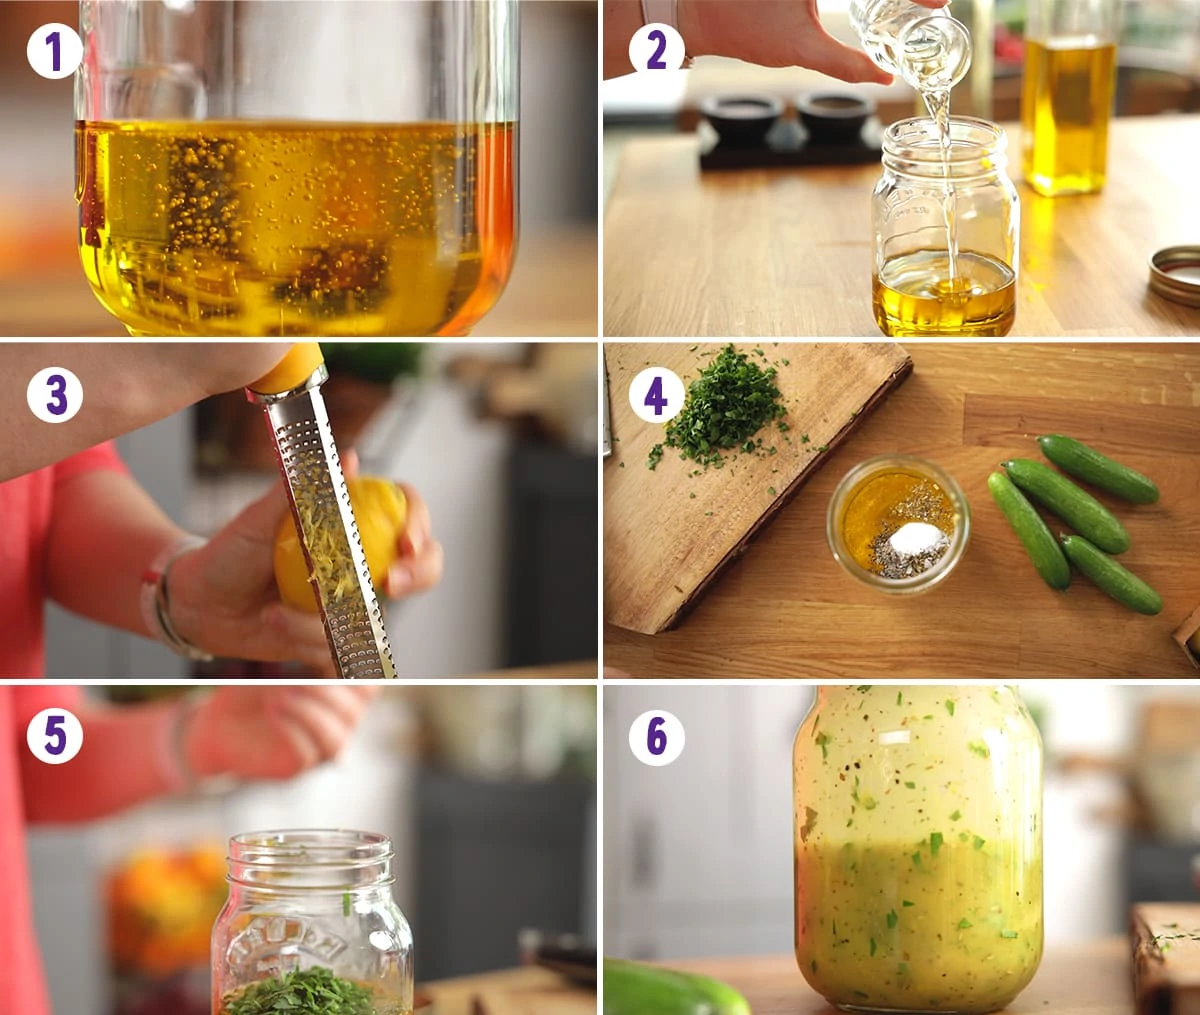 6 image collage showing how to make an Italian dressing for pasta salad